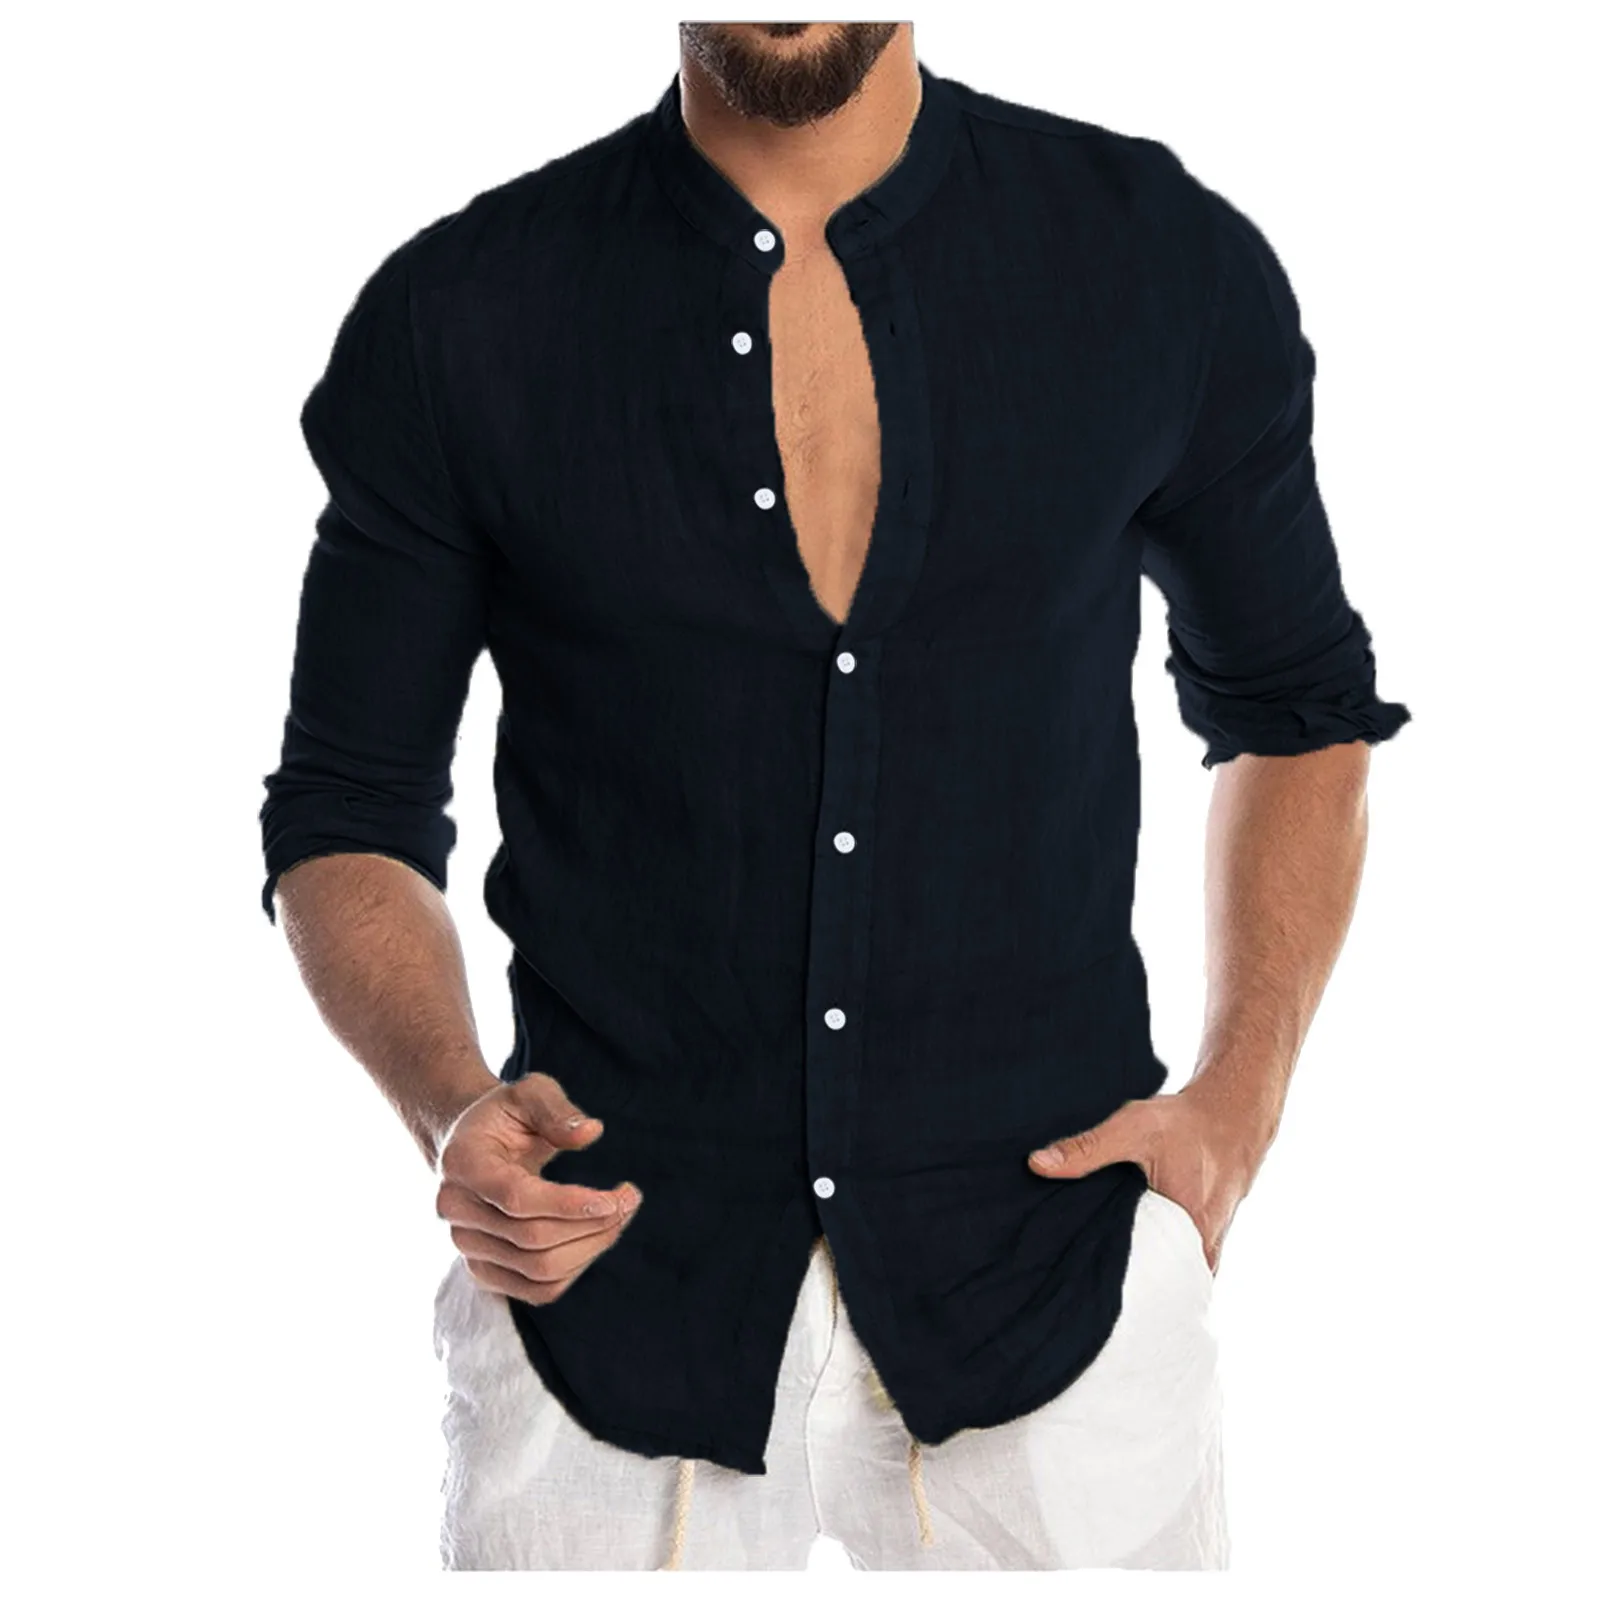 2022 Men's Fashion Casual Shirt Solid color collar open front long sleeve shirt Top comfortable cotton high quality shirt men's button up short sleeve shirts & tops Shirts